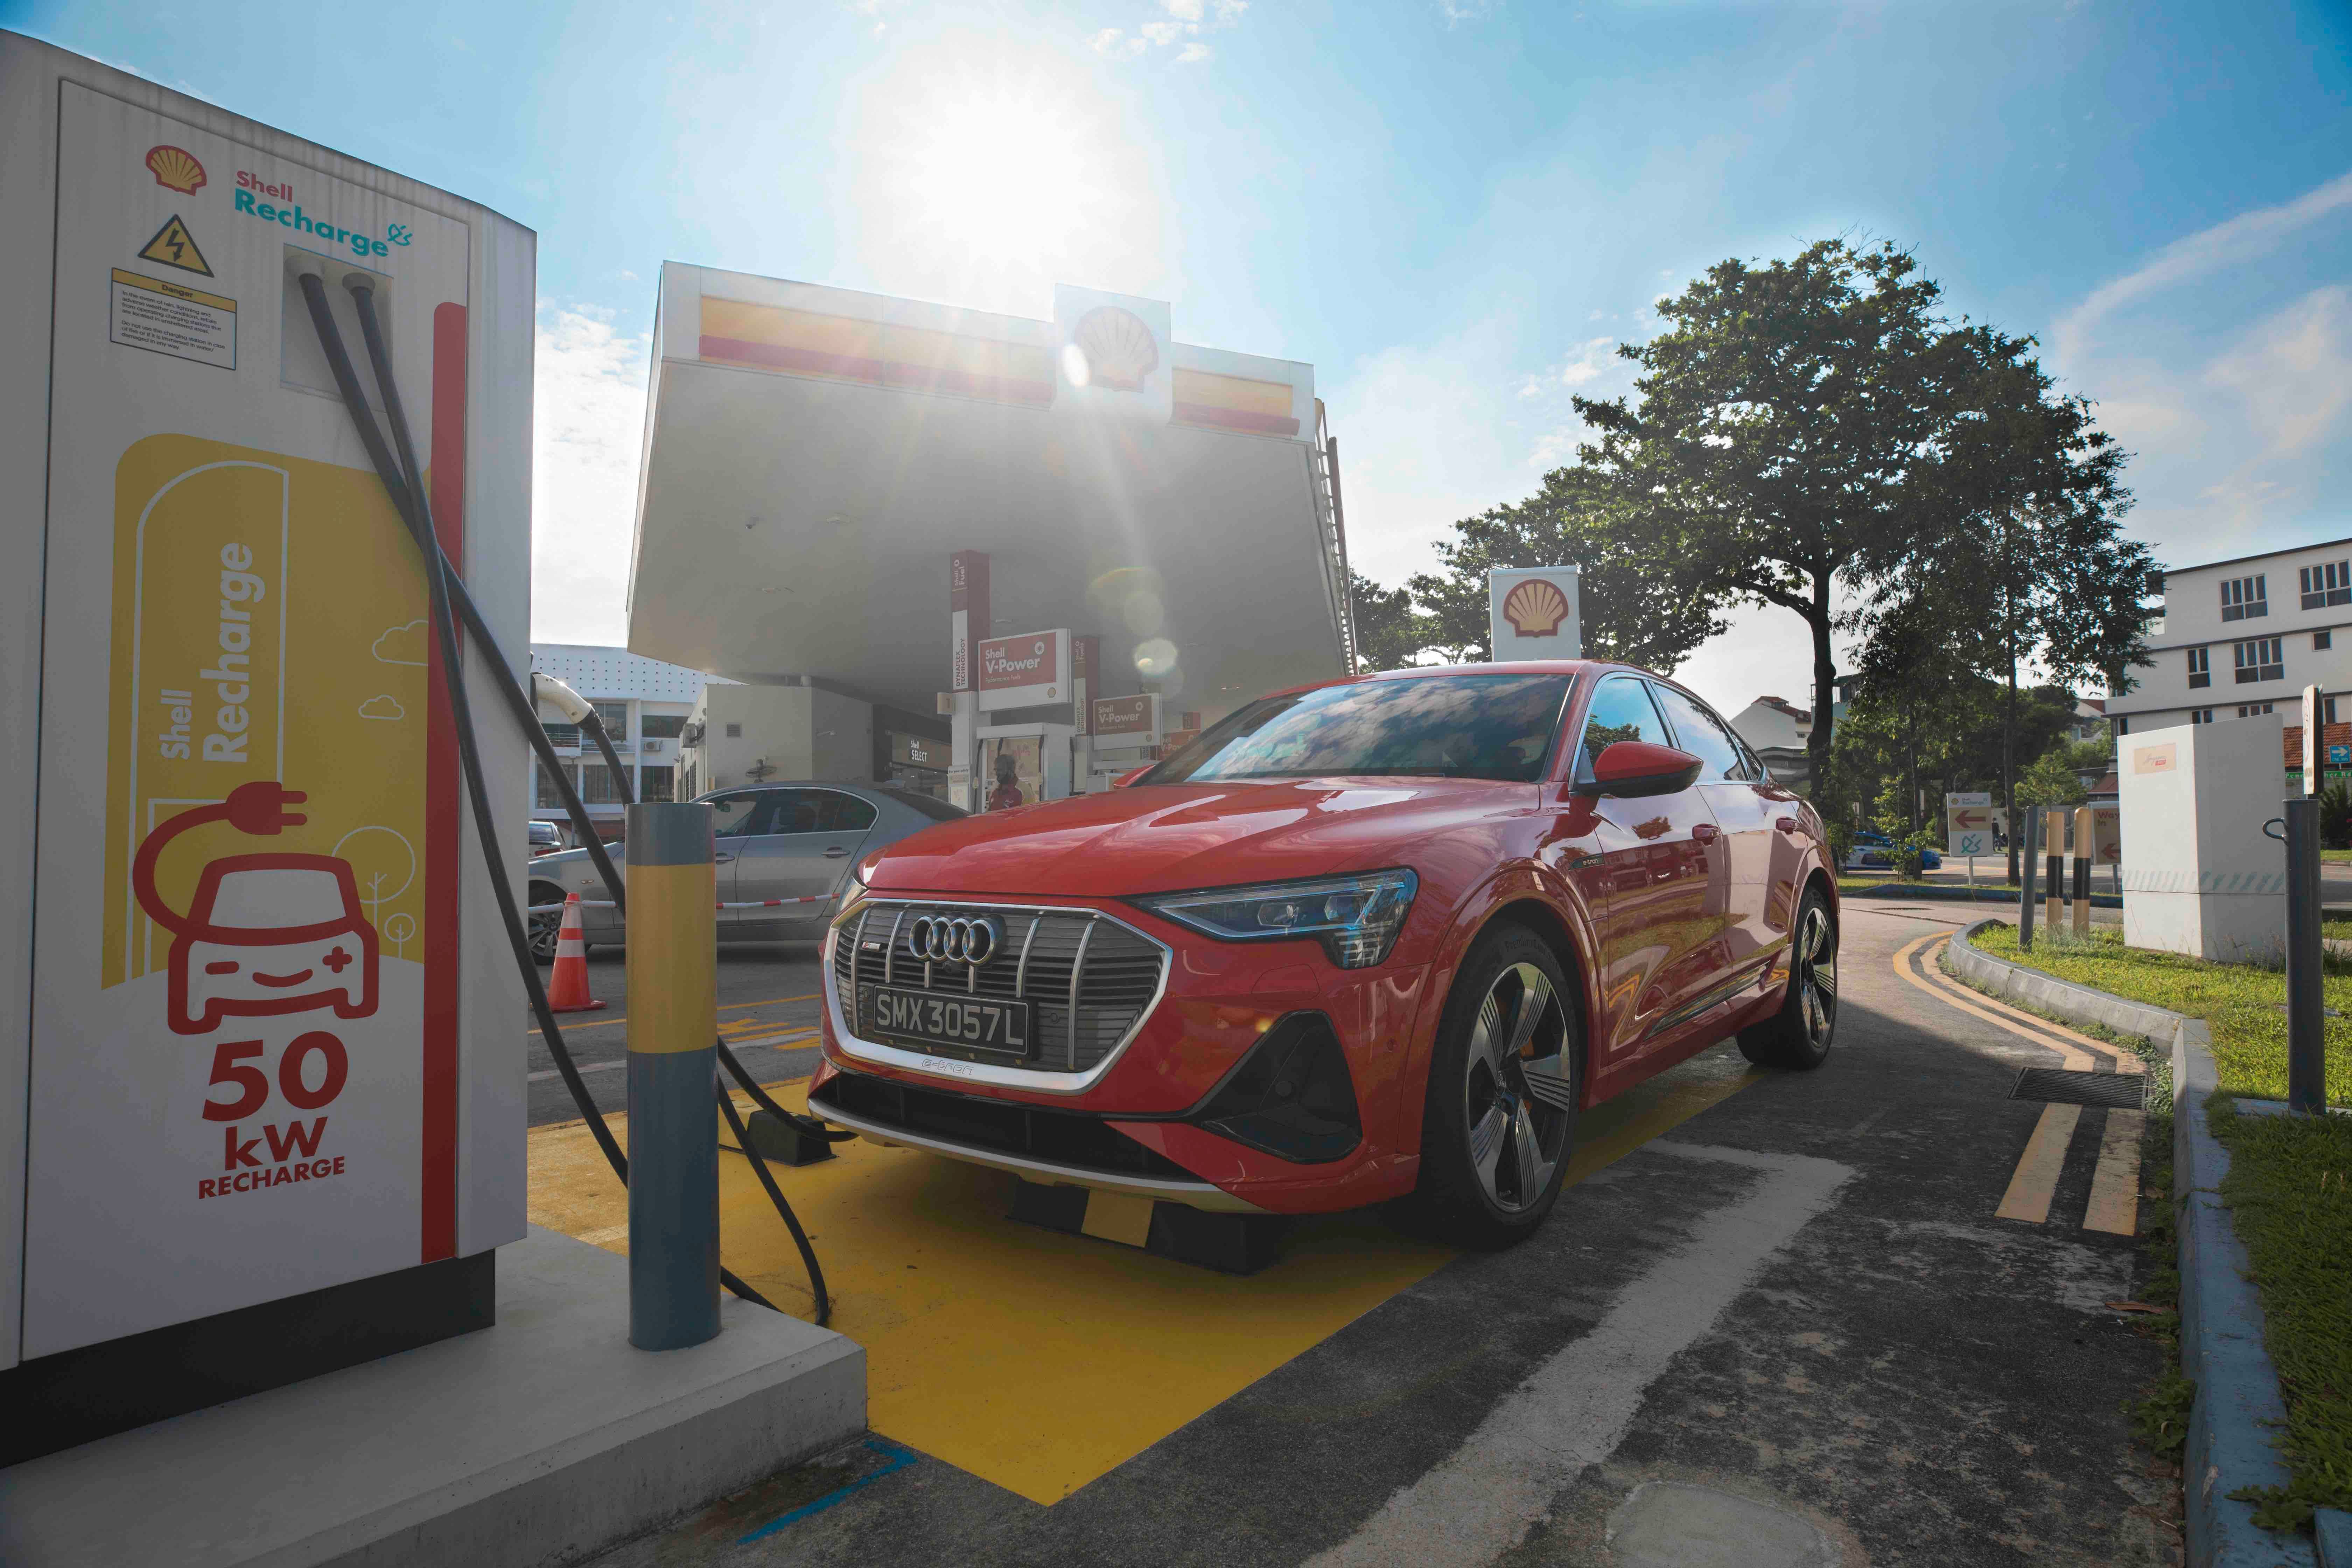 The Audi e-tron SportBack 50 being charged.